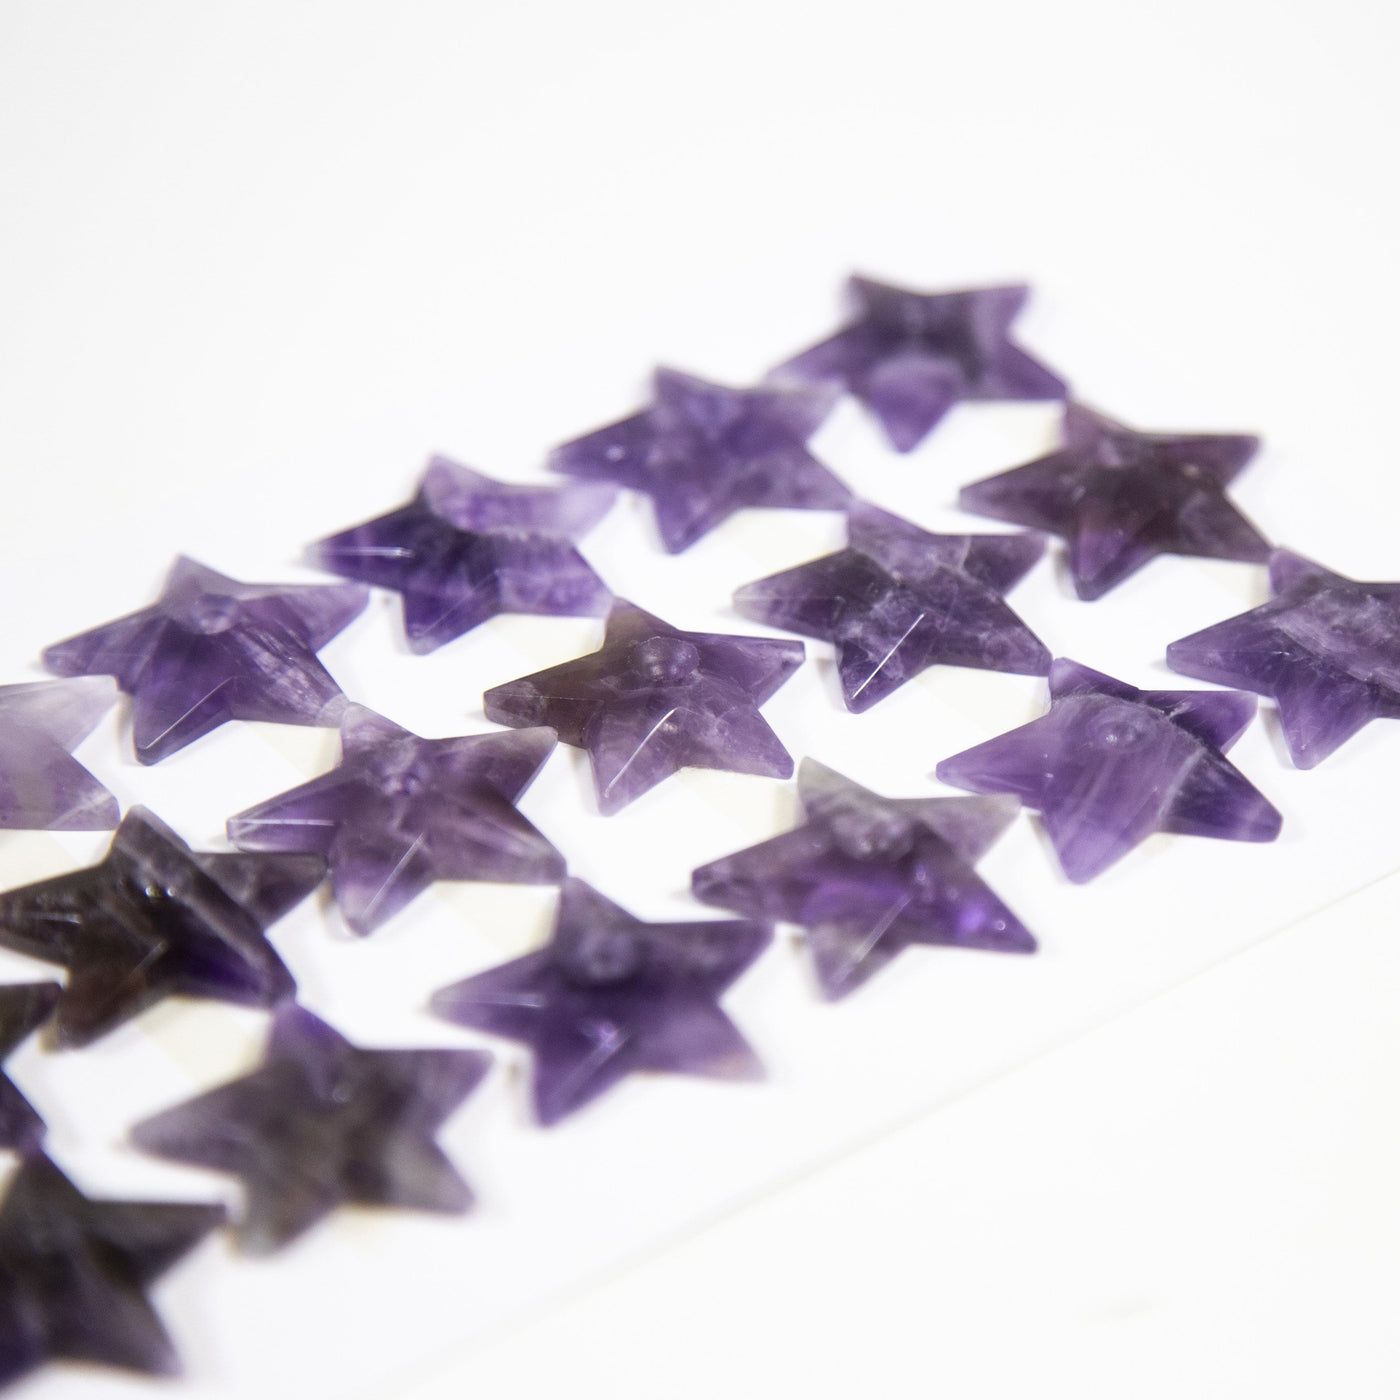 up close shot of amethyst star cabochons on white background